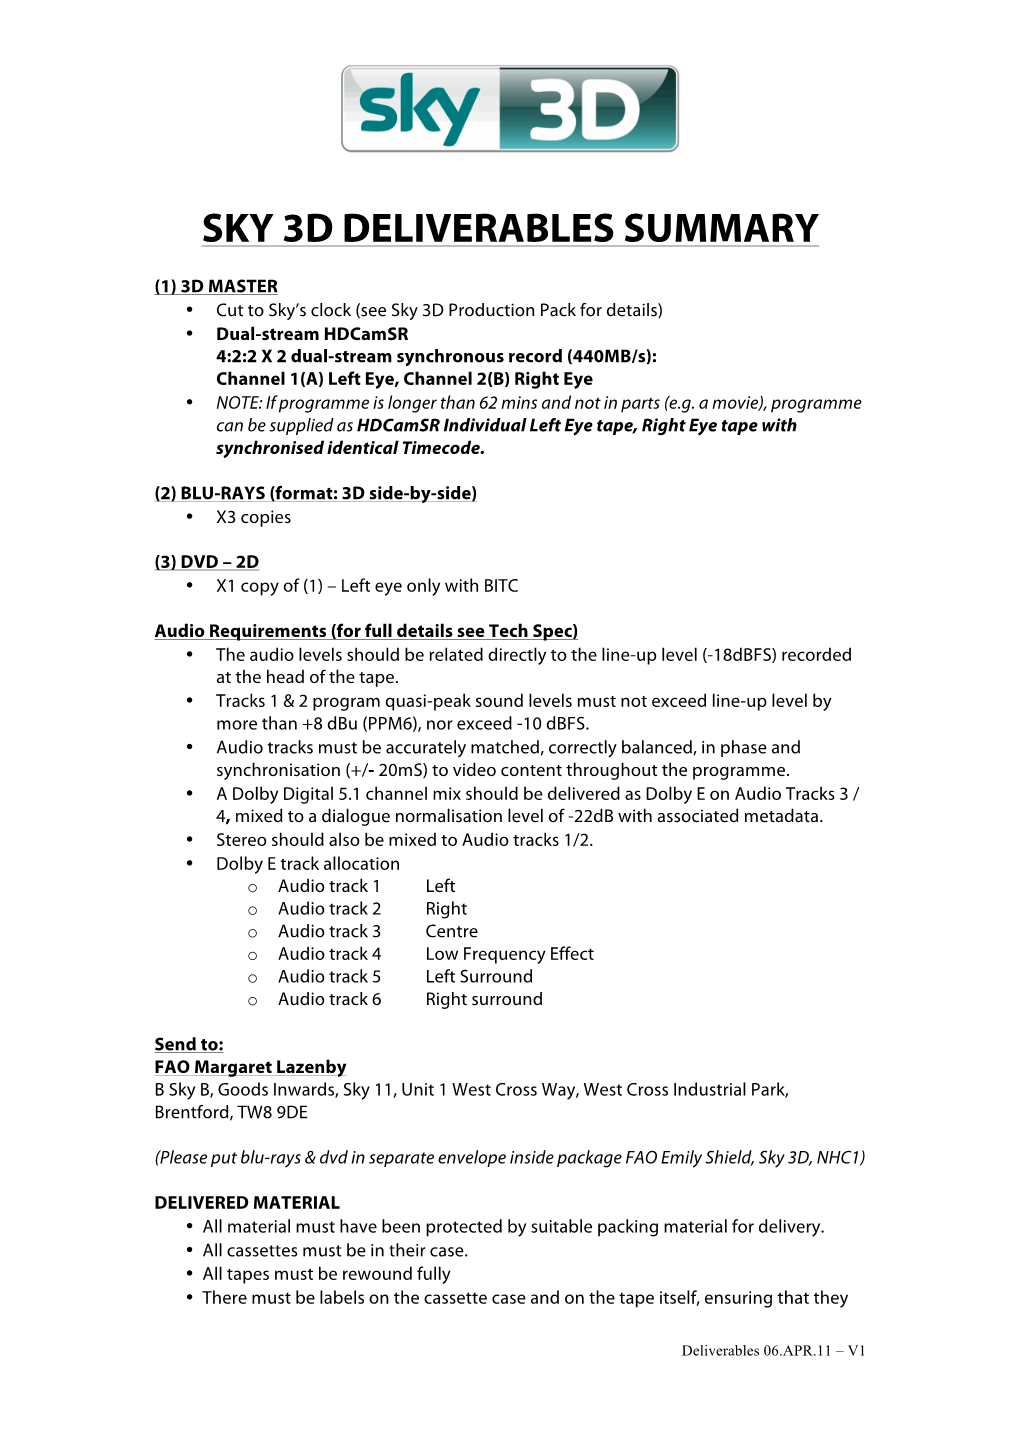 Sky 3D Deliverables Summary